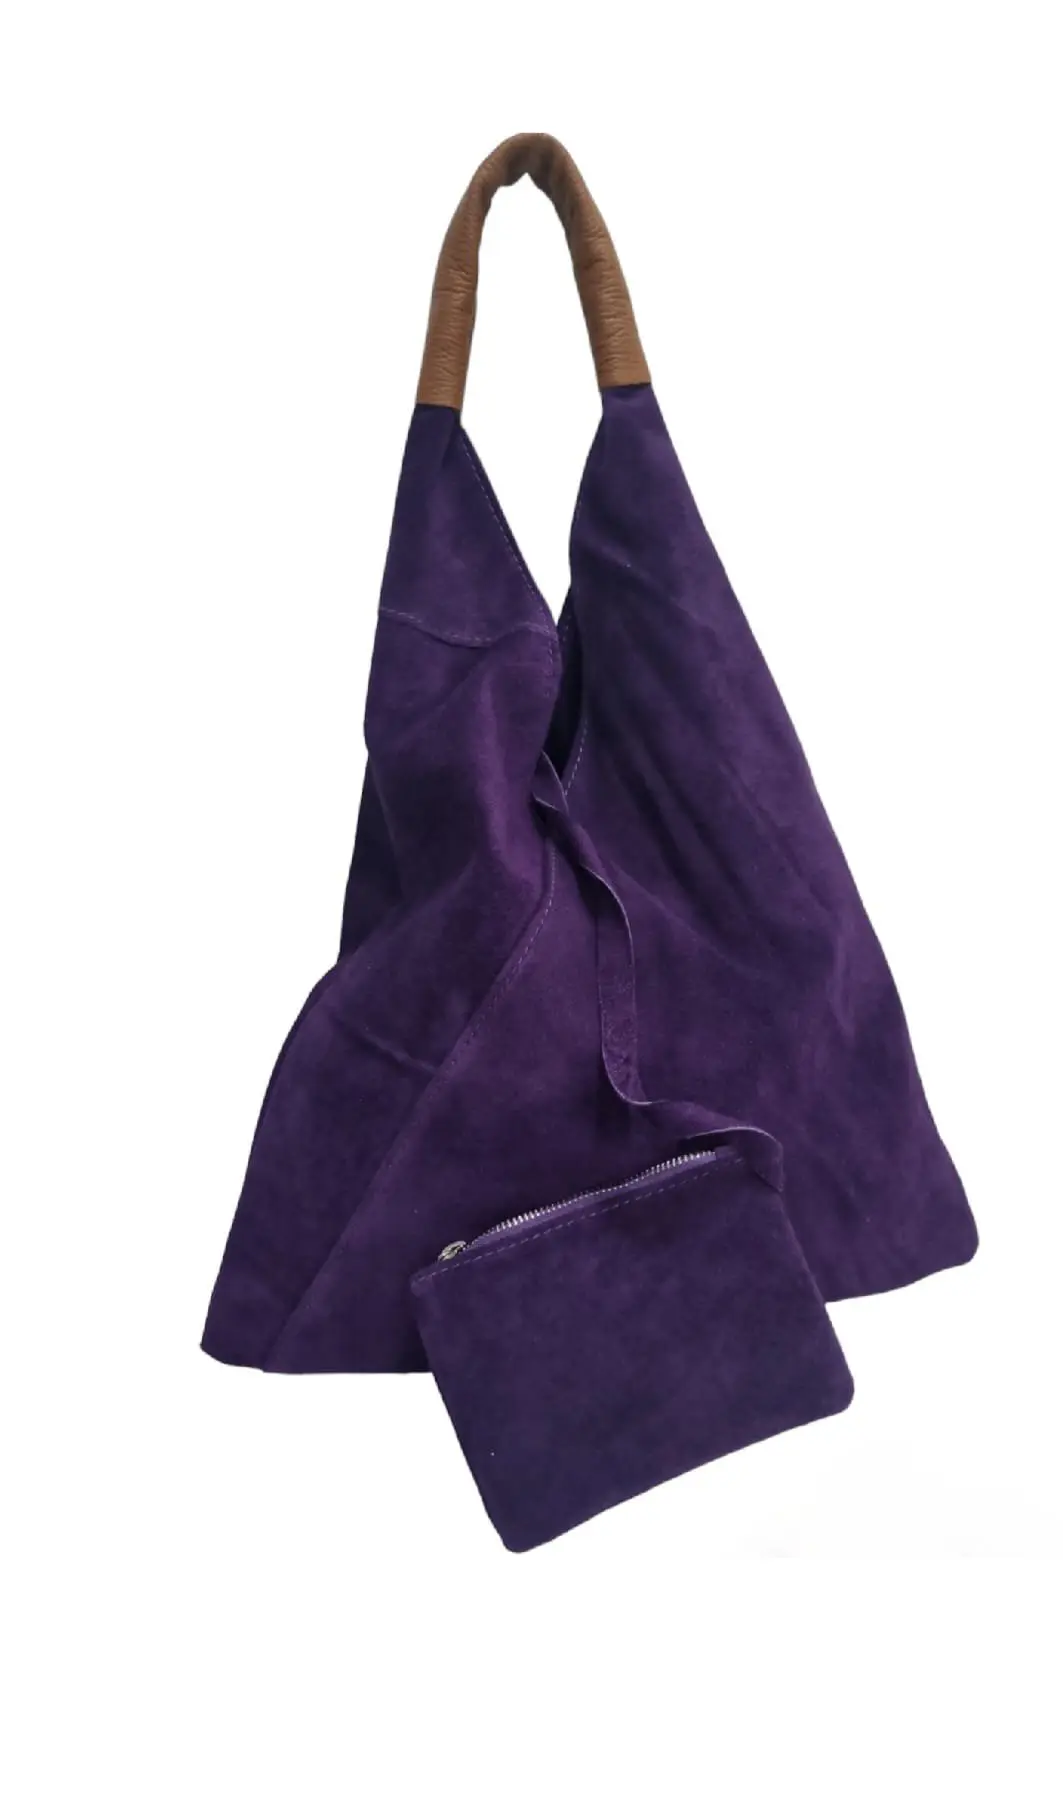 Naked suede bag with real leather handle – Made in Italy